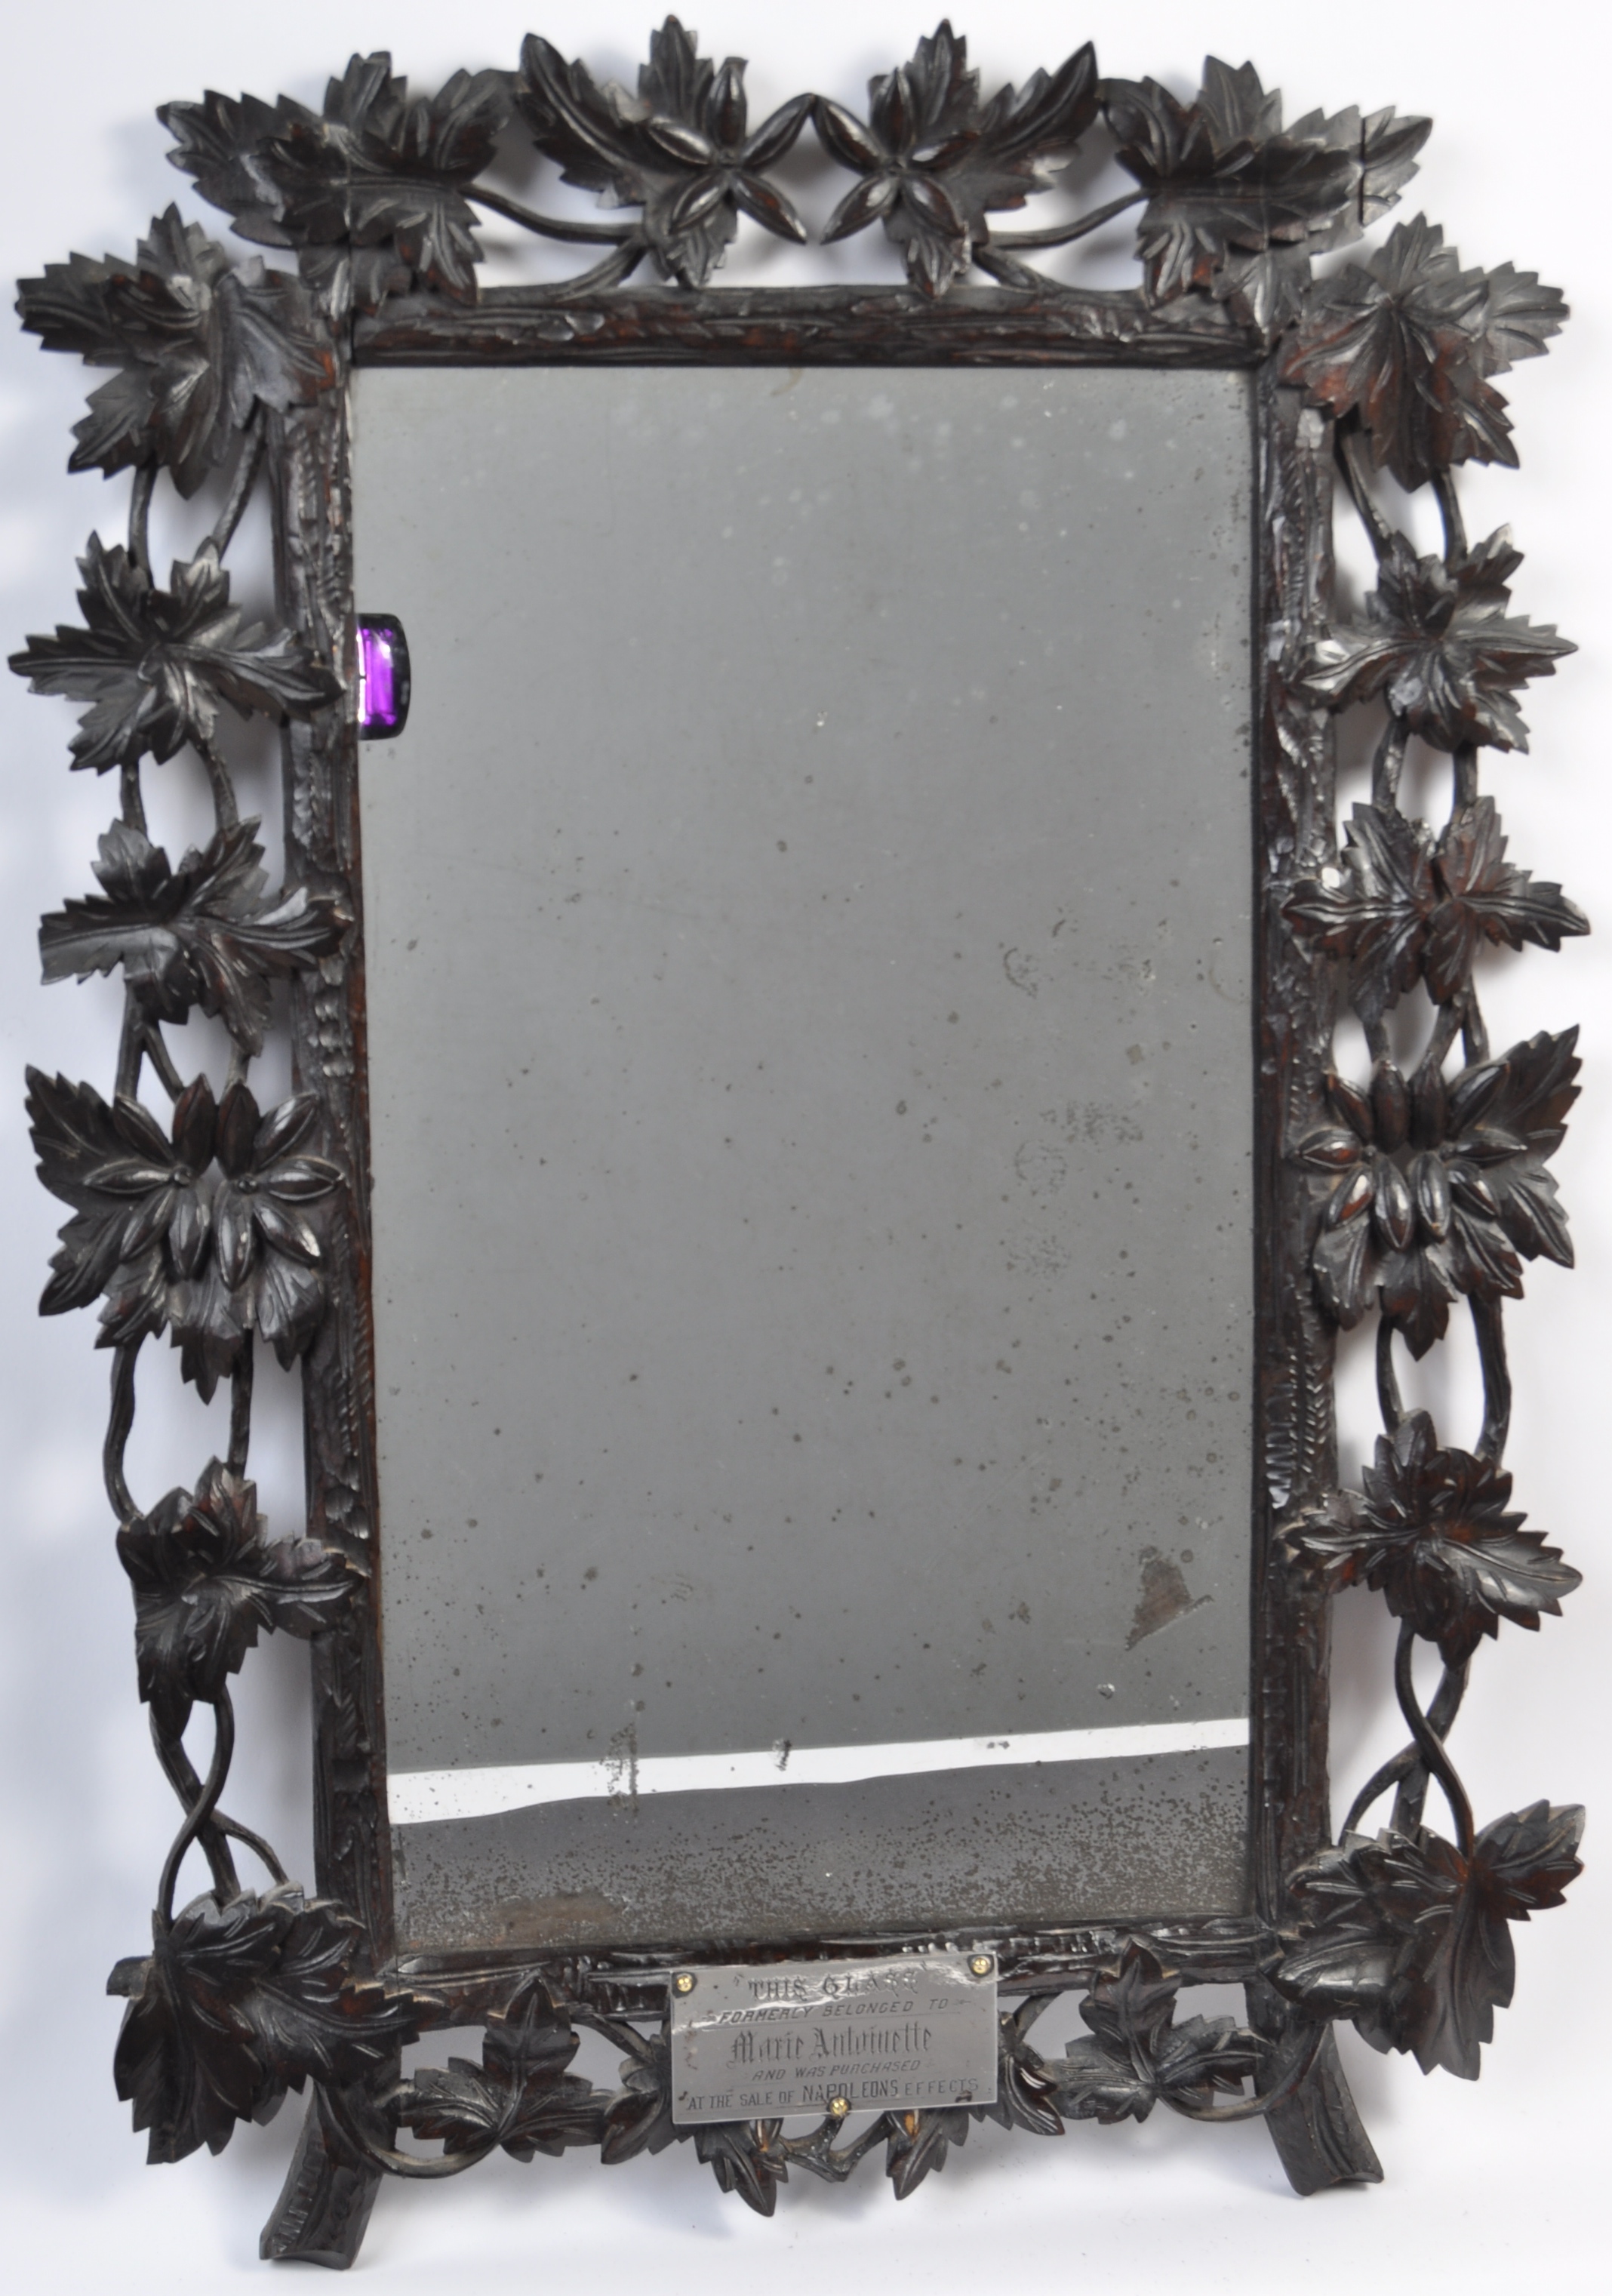 MARIE ANTOINETTE'S MIRROR - 18TH CENTURY MIRROR FROM NAPOLEON'S EFFECTS - Image 13 of 13